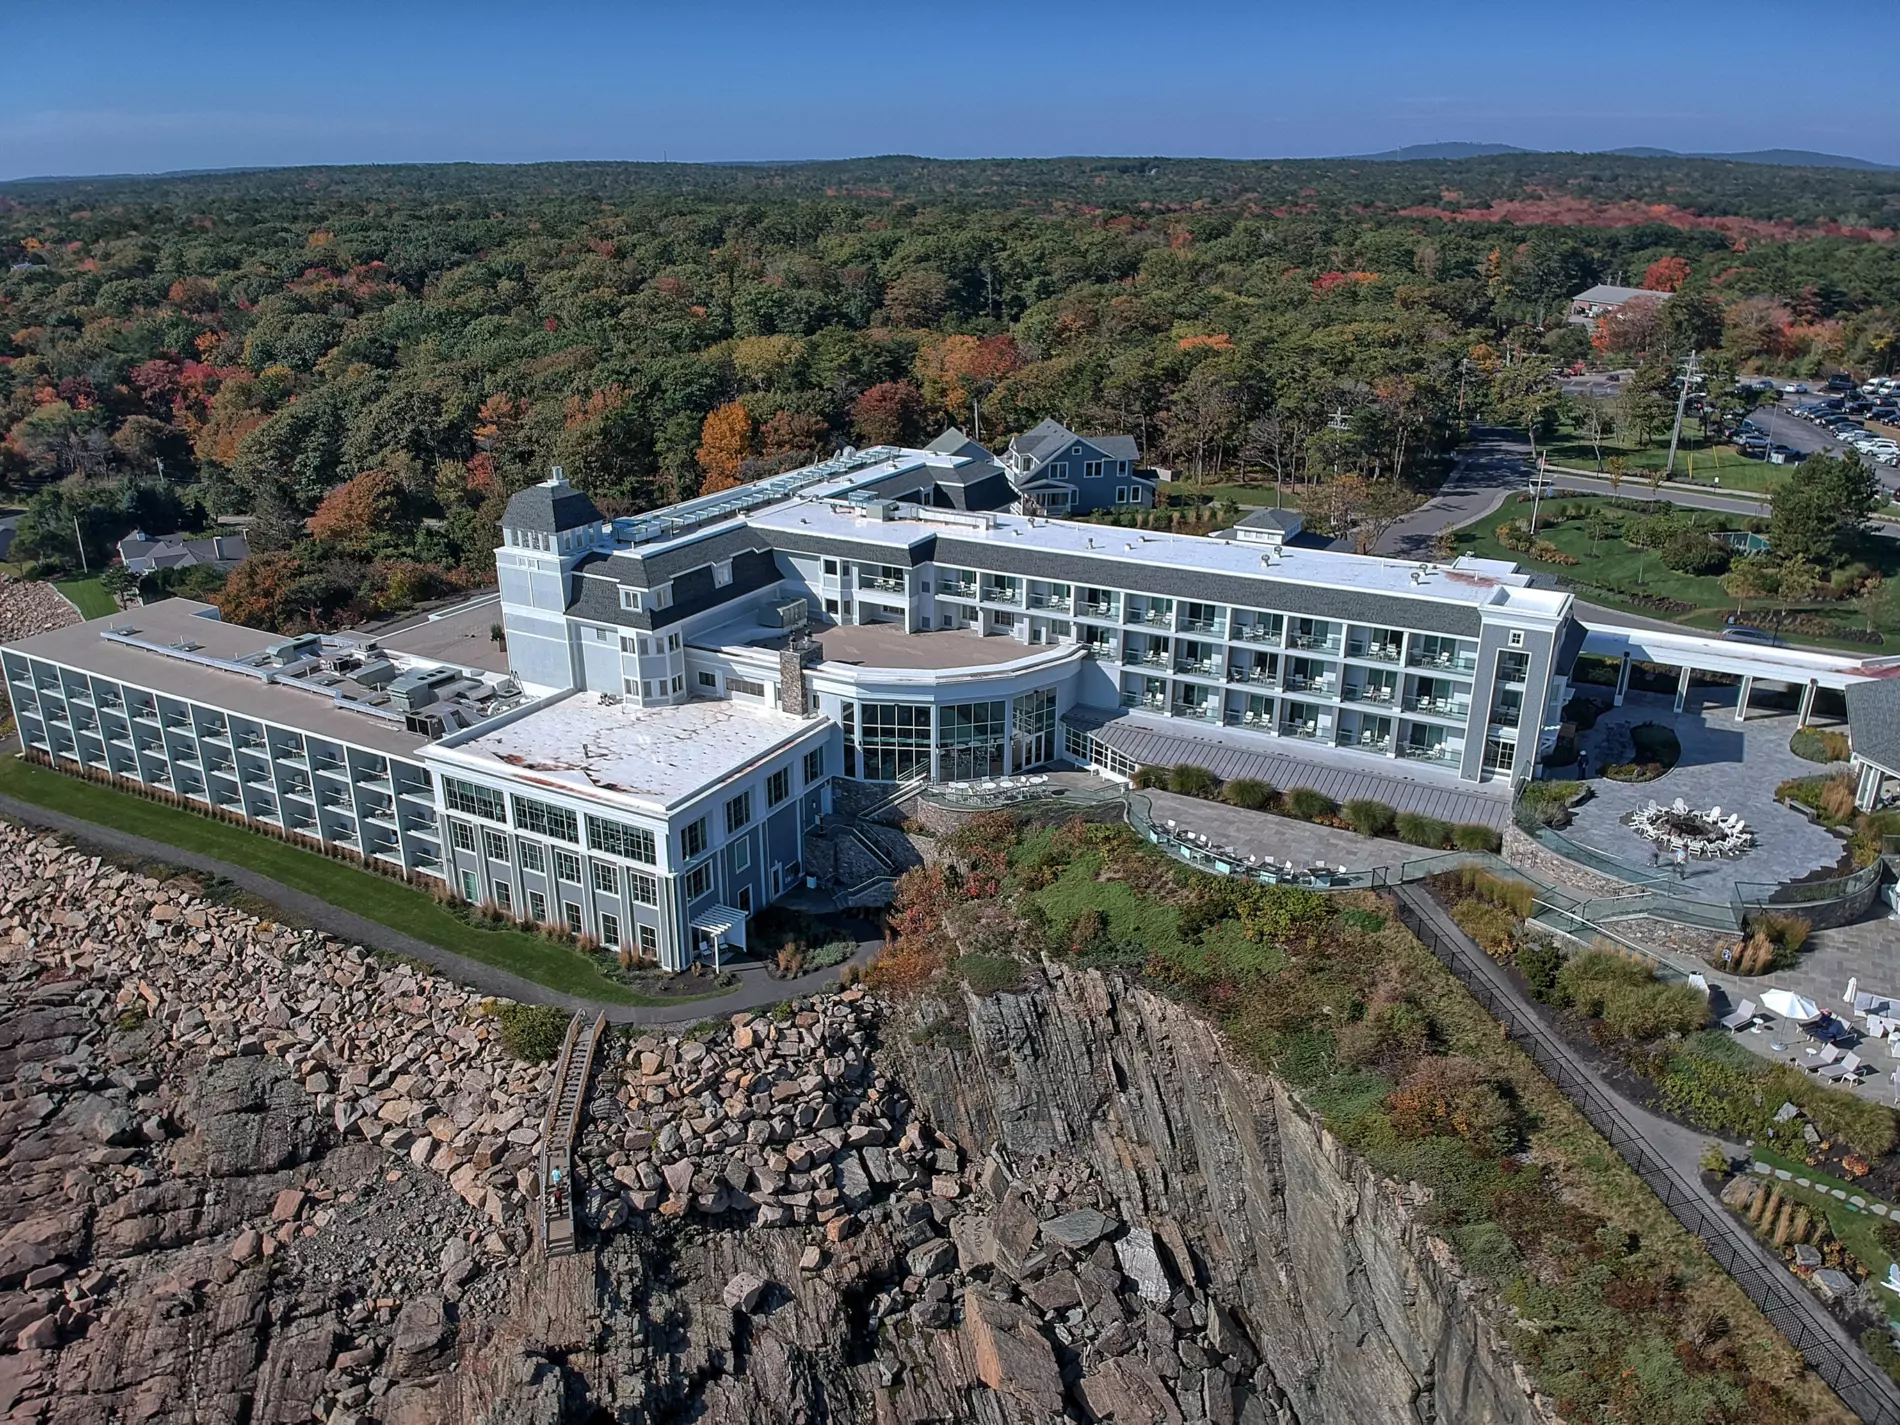 The Cliff House is a modern luxury resort in Ogunquit, Maine